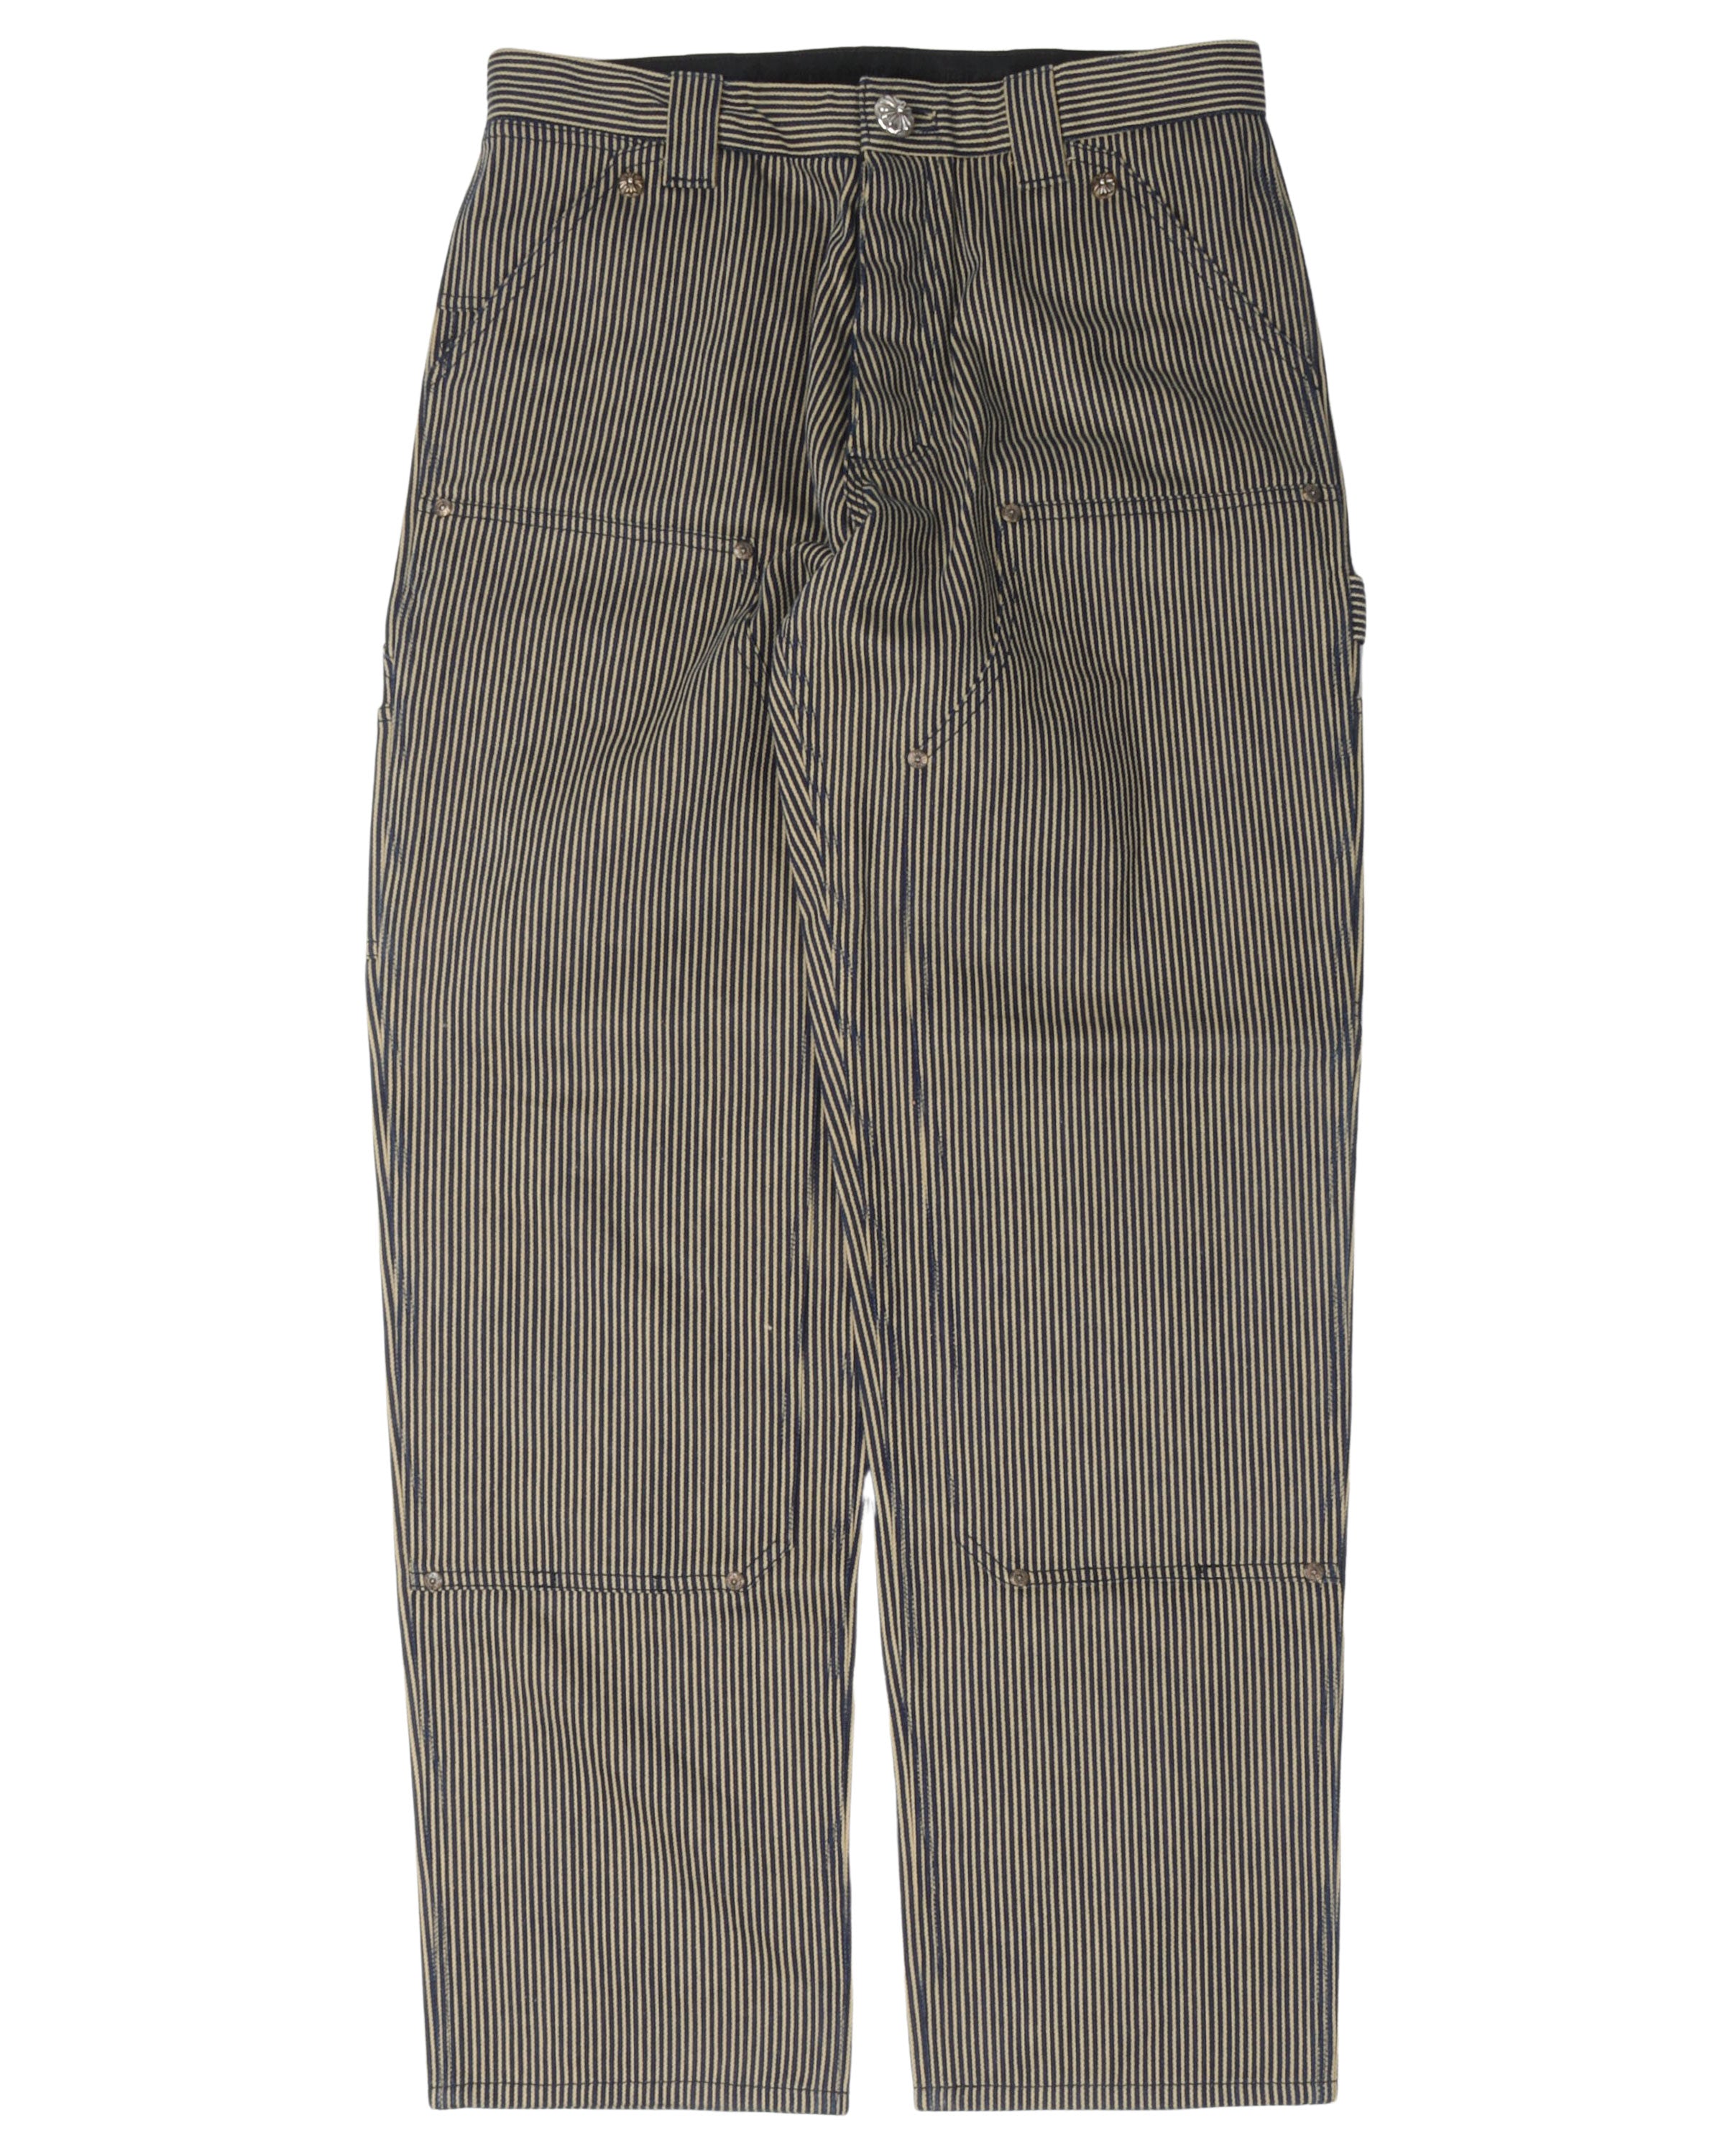 Hickory Striped Double Knee Work Pants